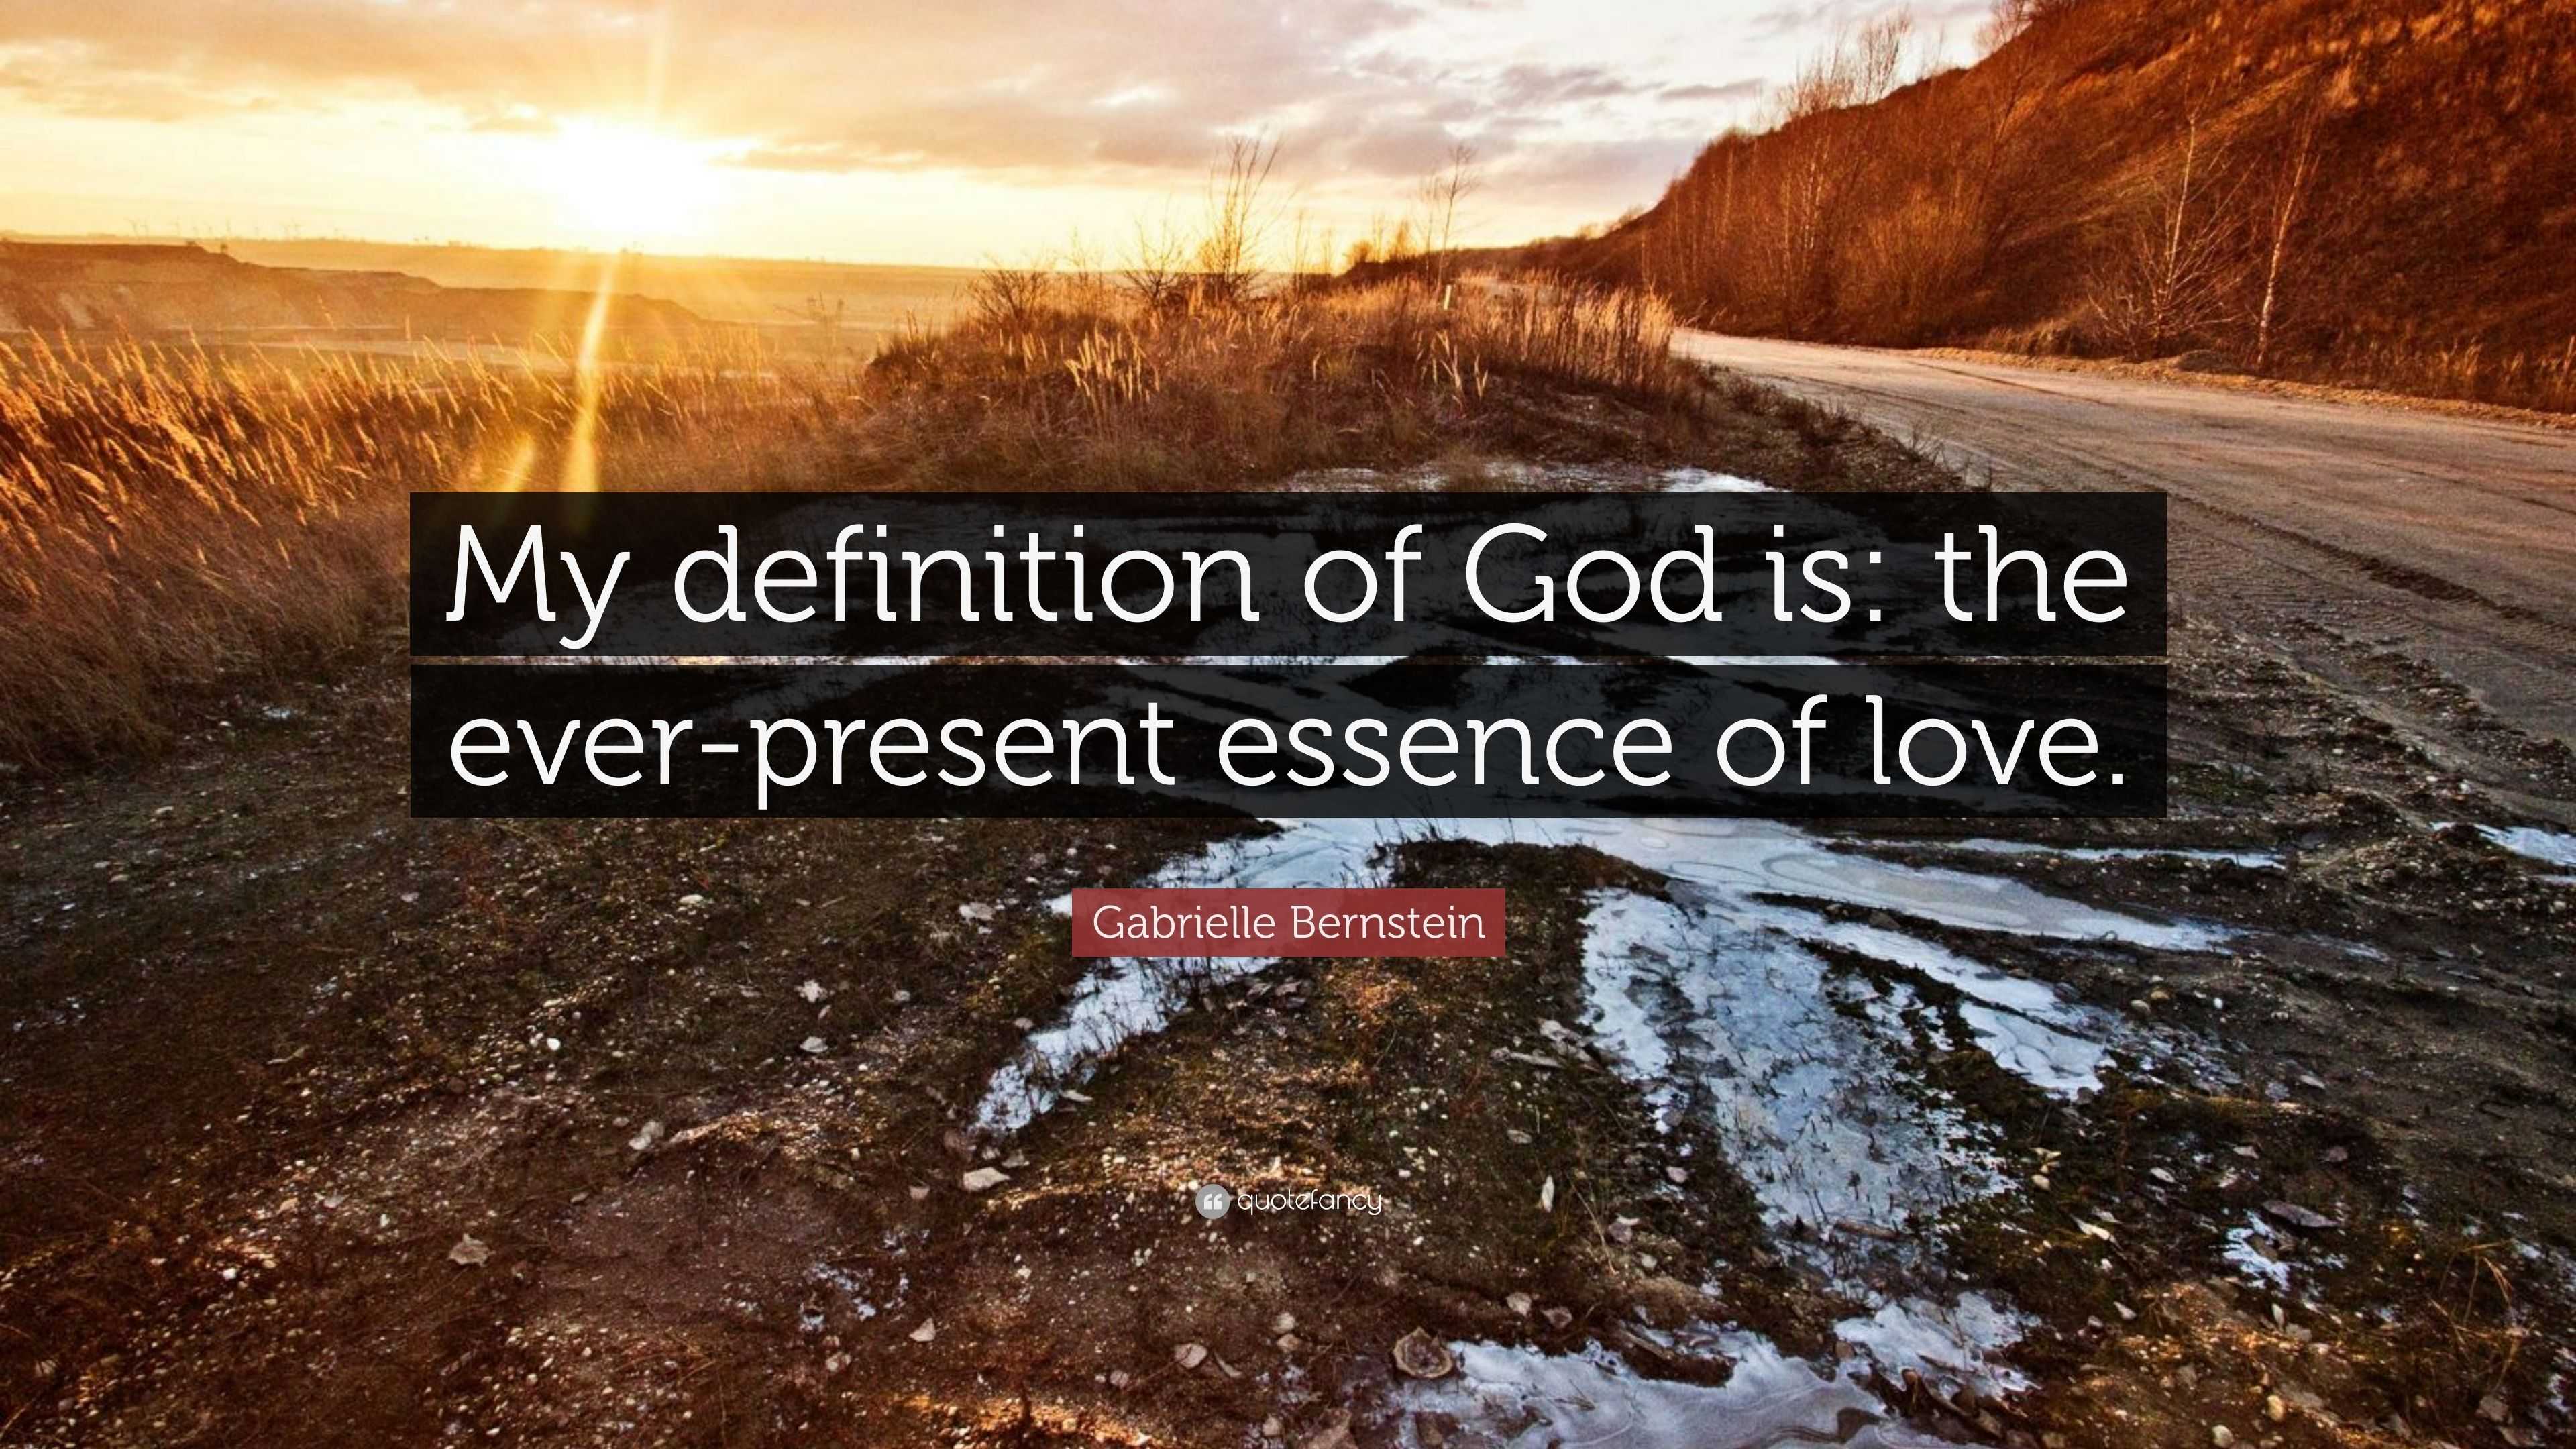 Gabrielle Bernstein Quote: “My definition of God is: the ever-present ...